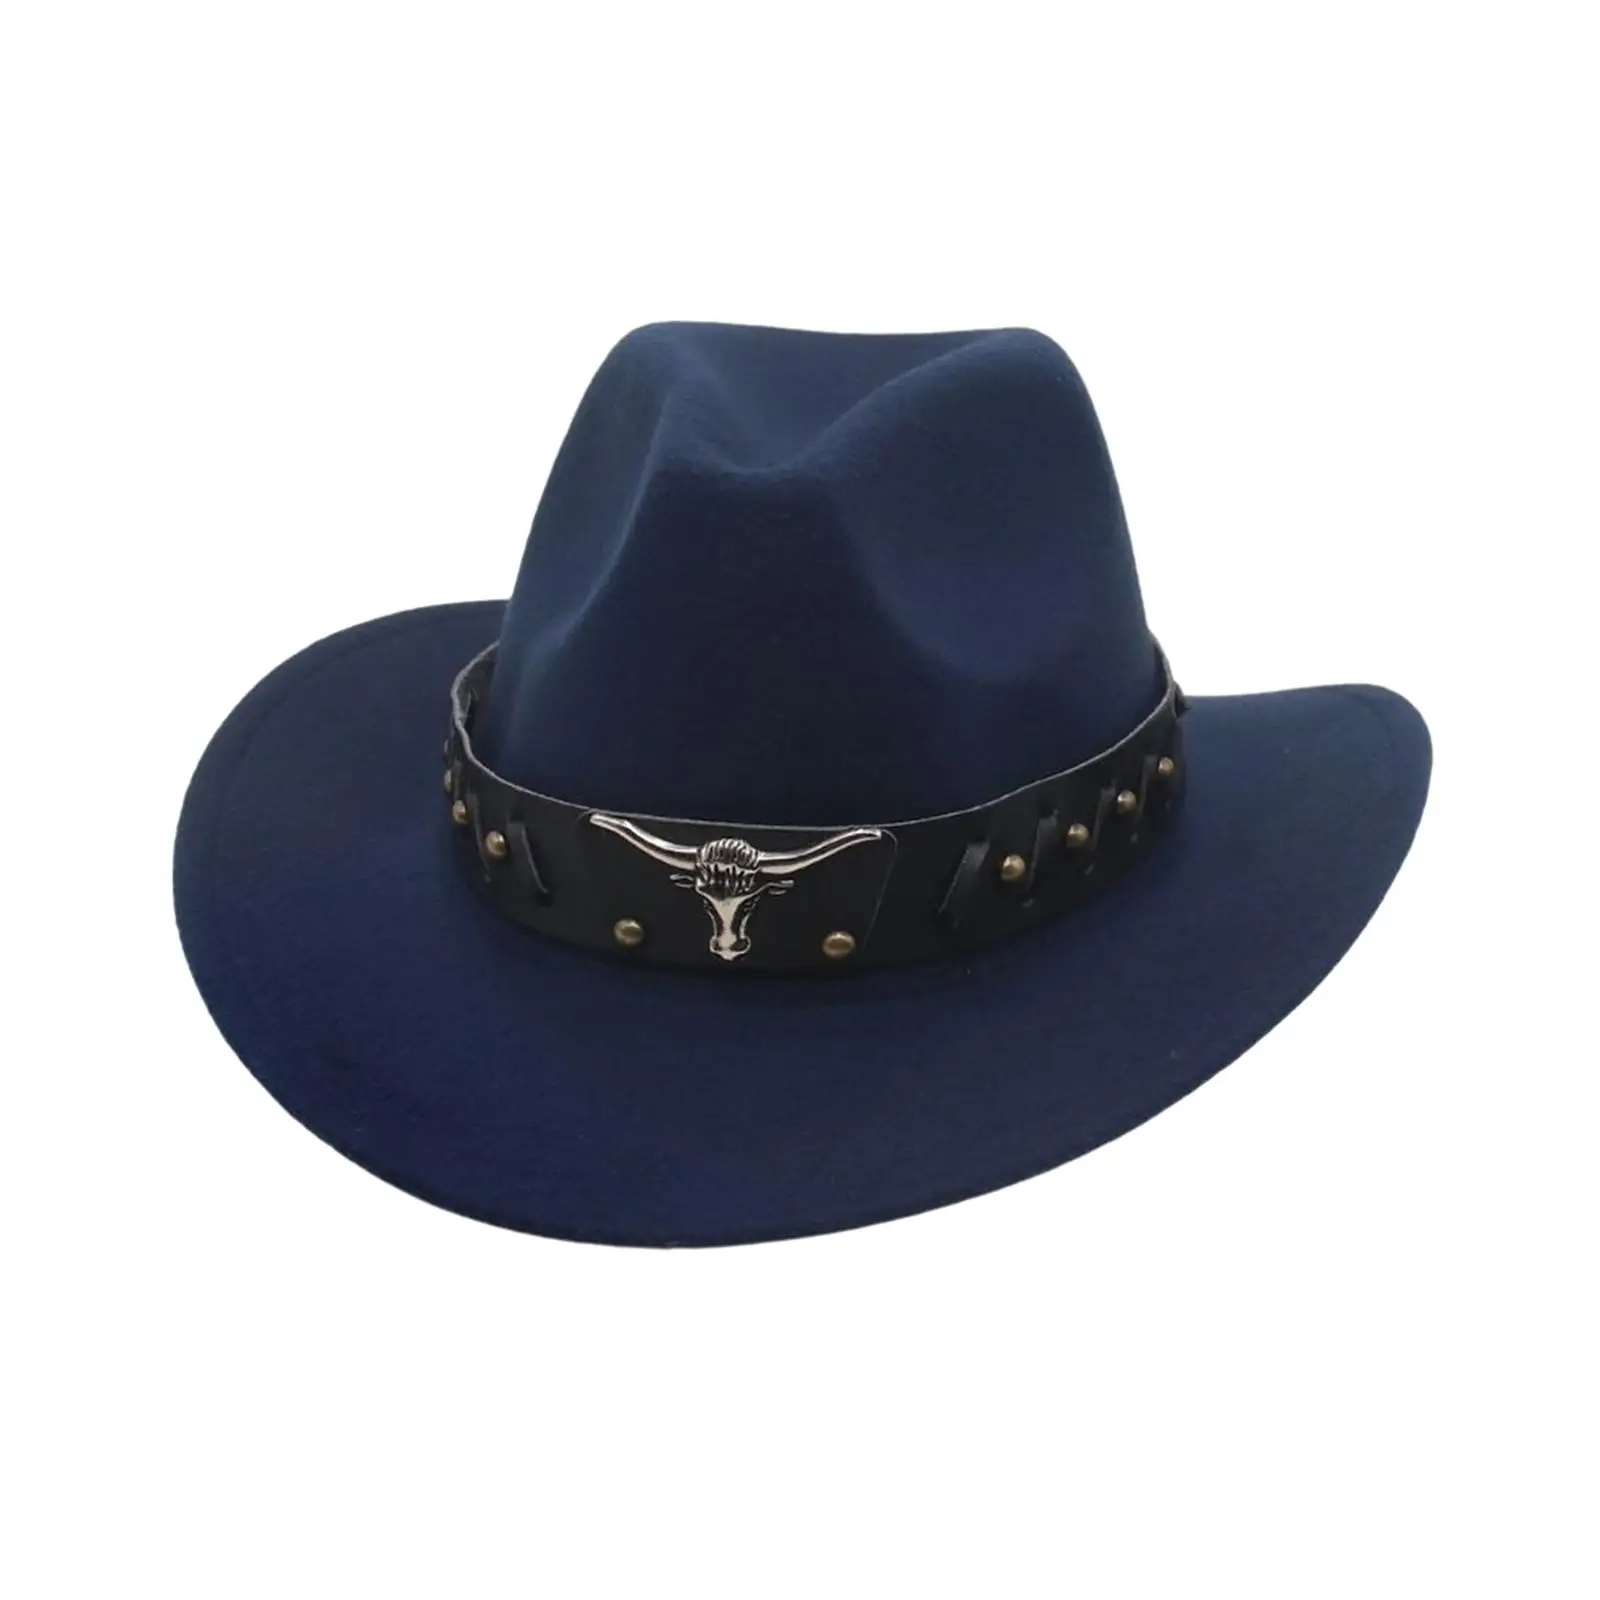 Western Cowboy Hat Cosplay Classic Versatile Women Photo Props Cowgirl Hat Sunhat for Autumn Party Gift Holiday Costume Hiking